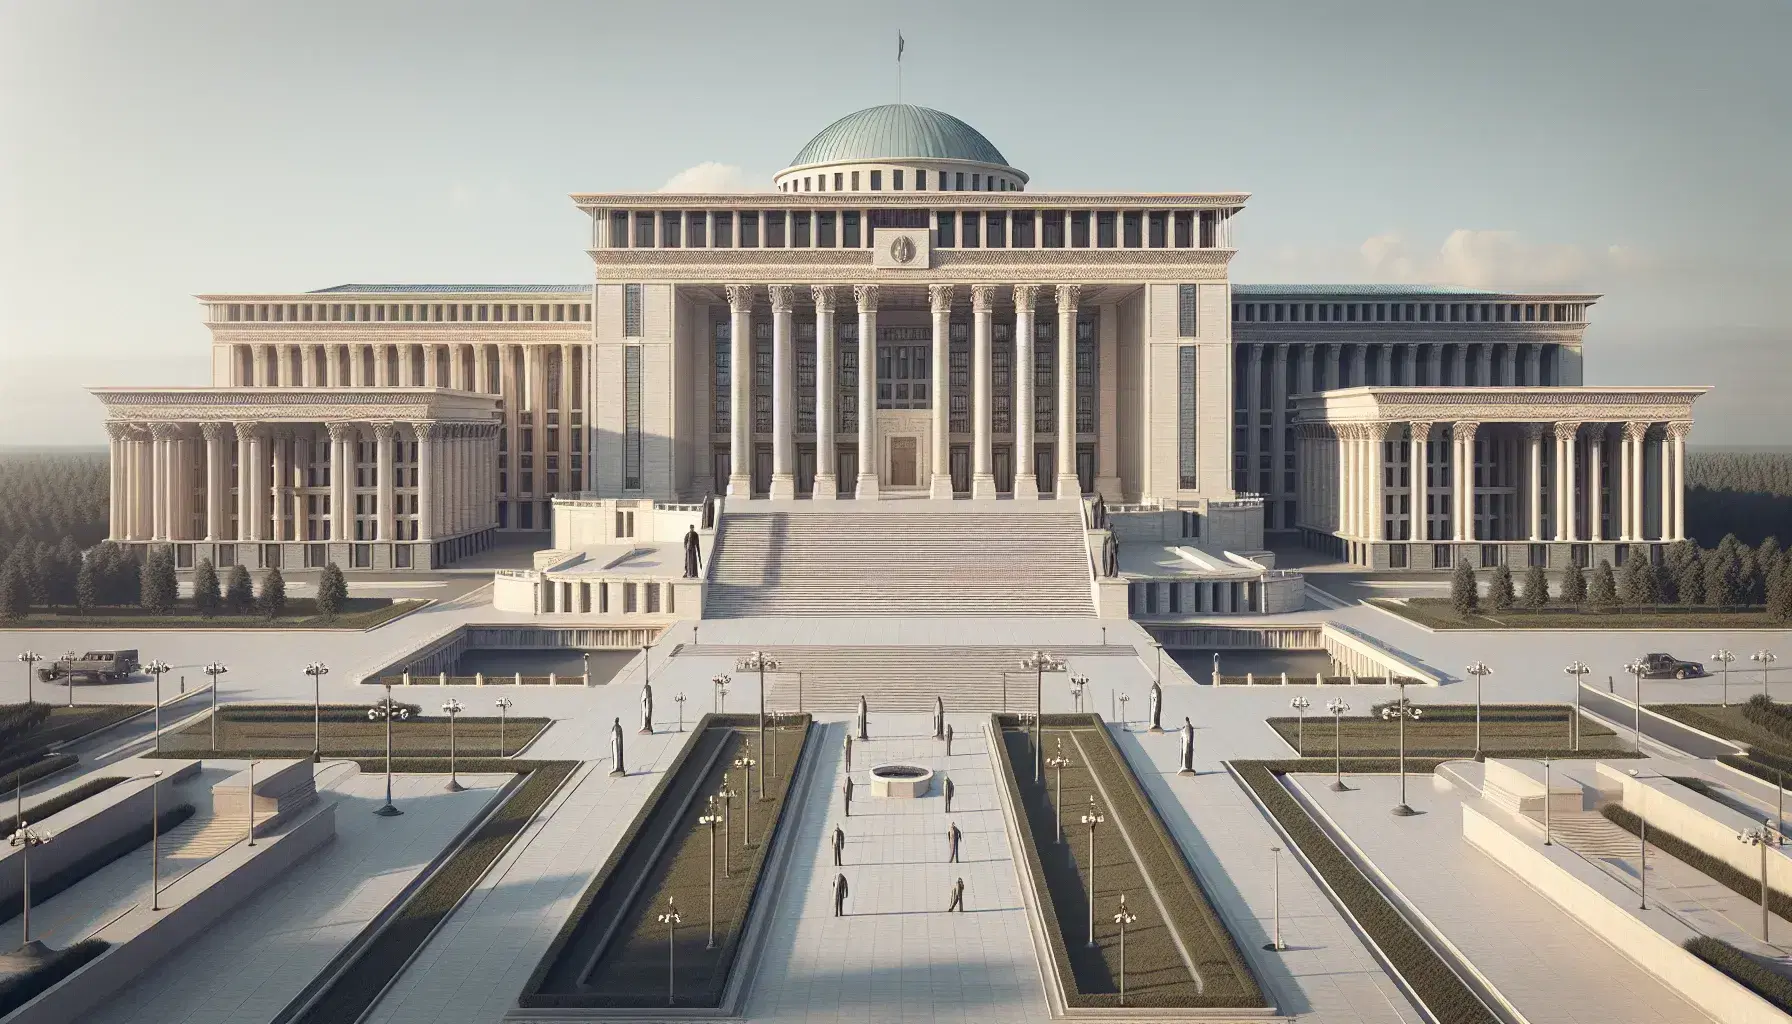 Neoclassical government building with a large dome, symmetrical columns, and statues holding scrolls, set against a clear blue sky.